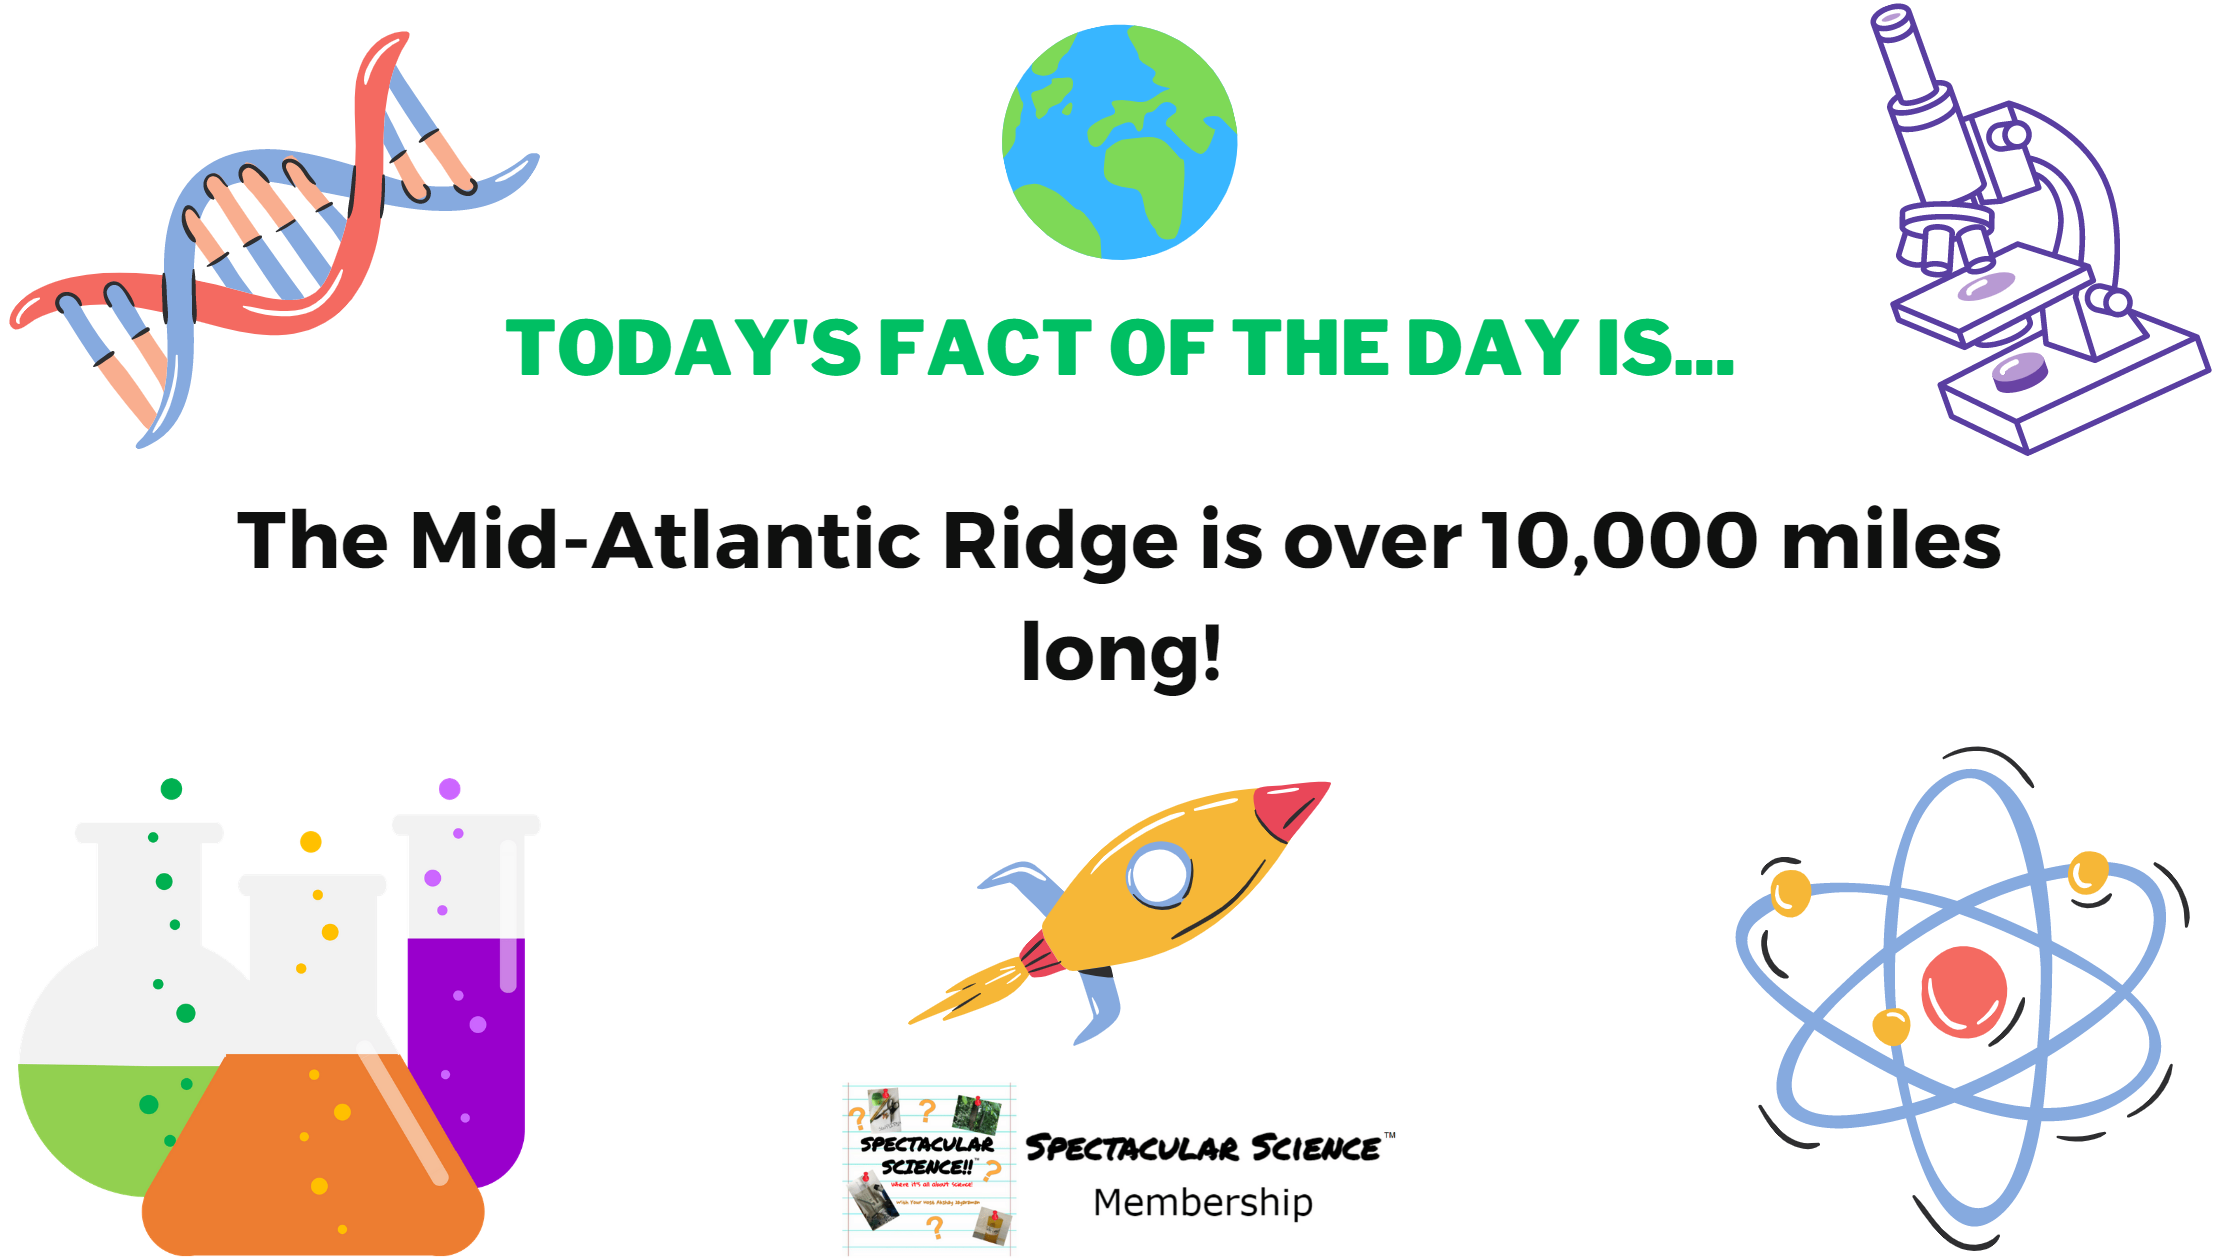 Fact of the Day Image May 11